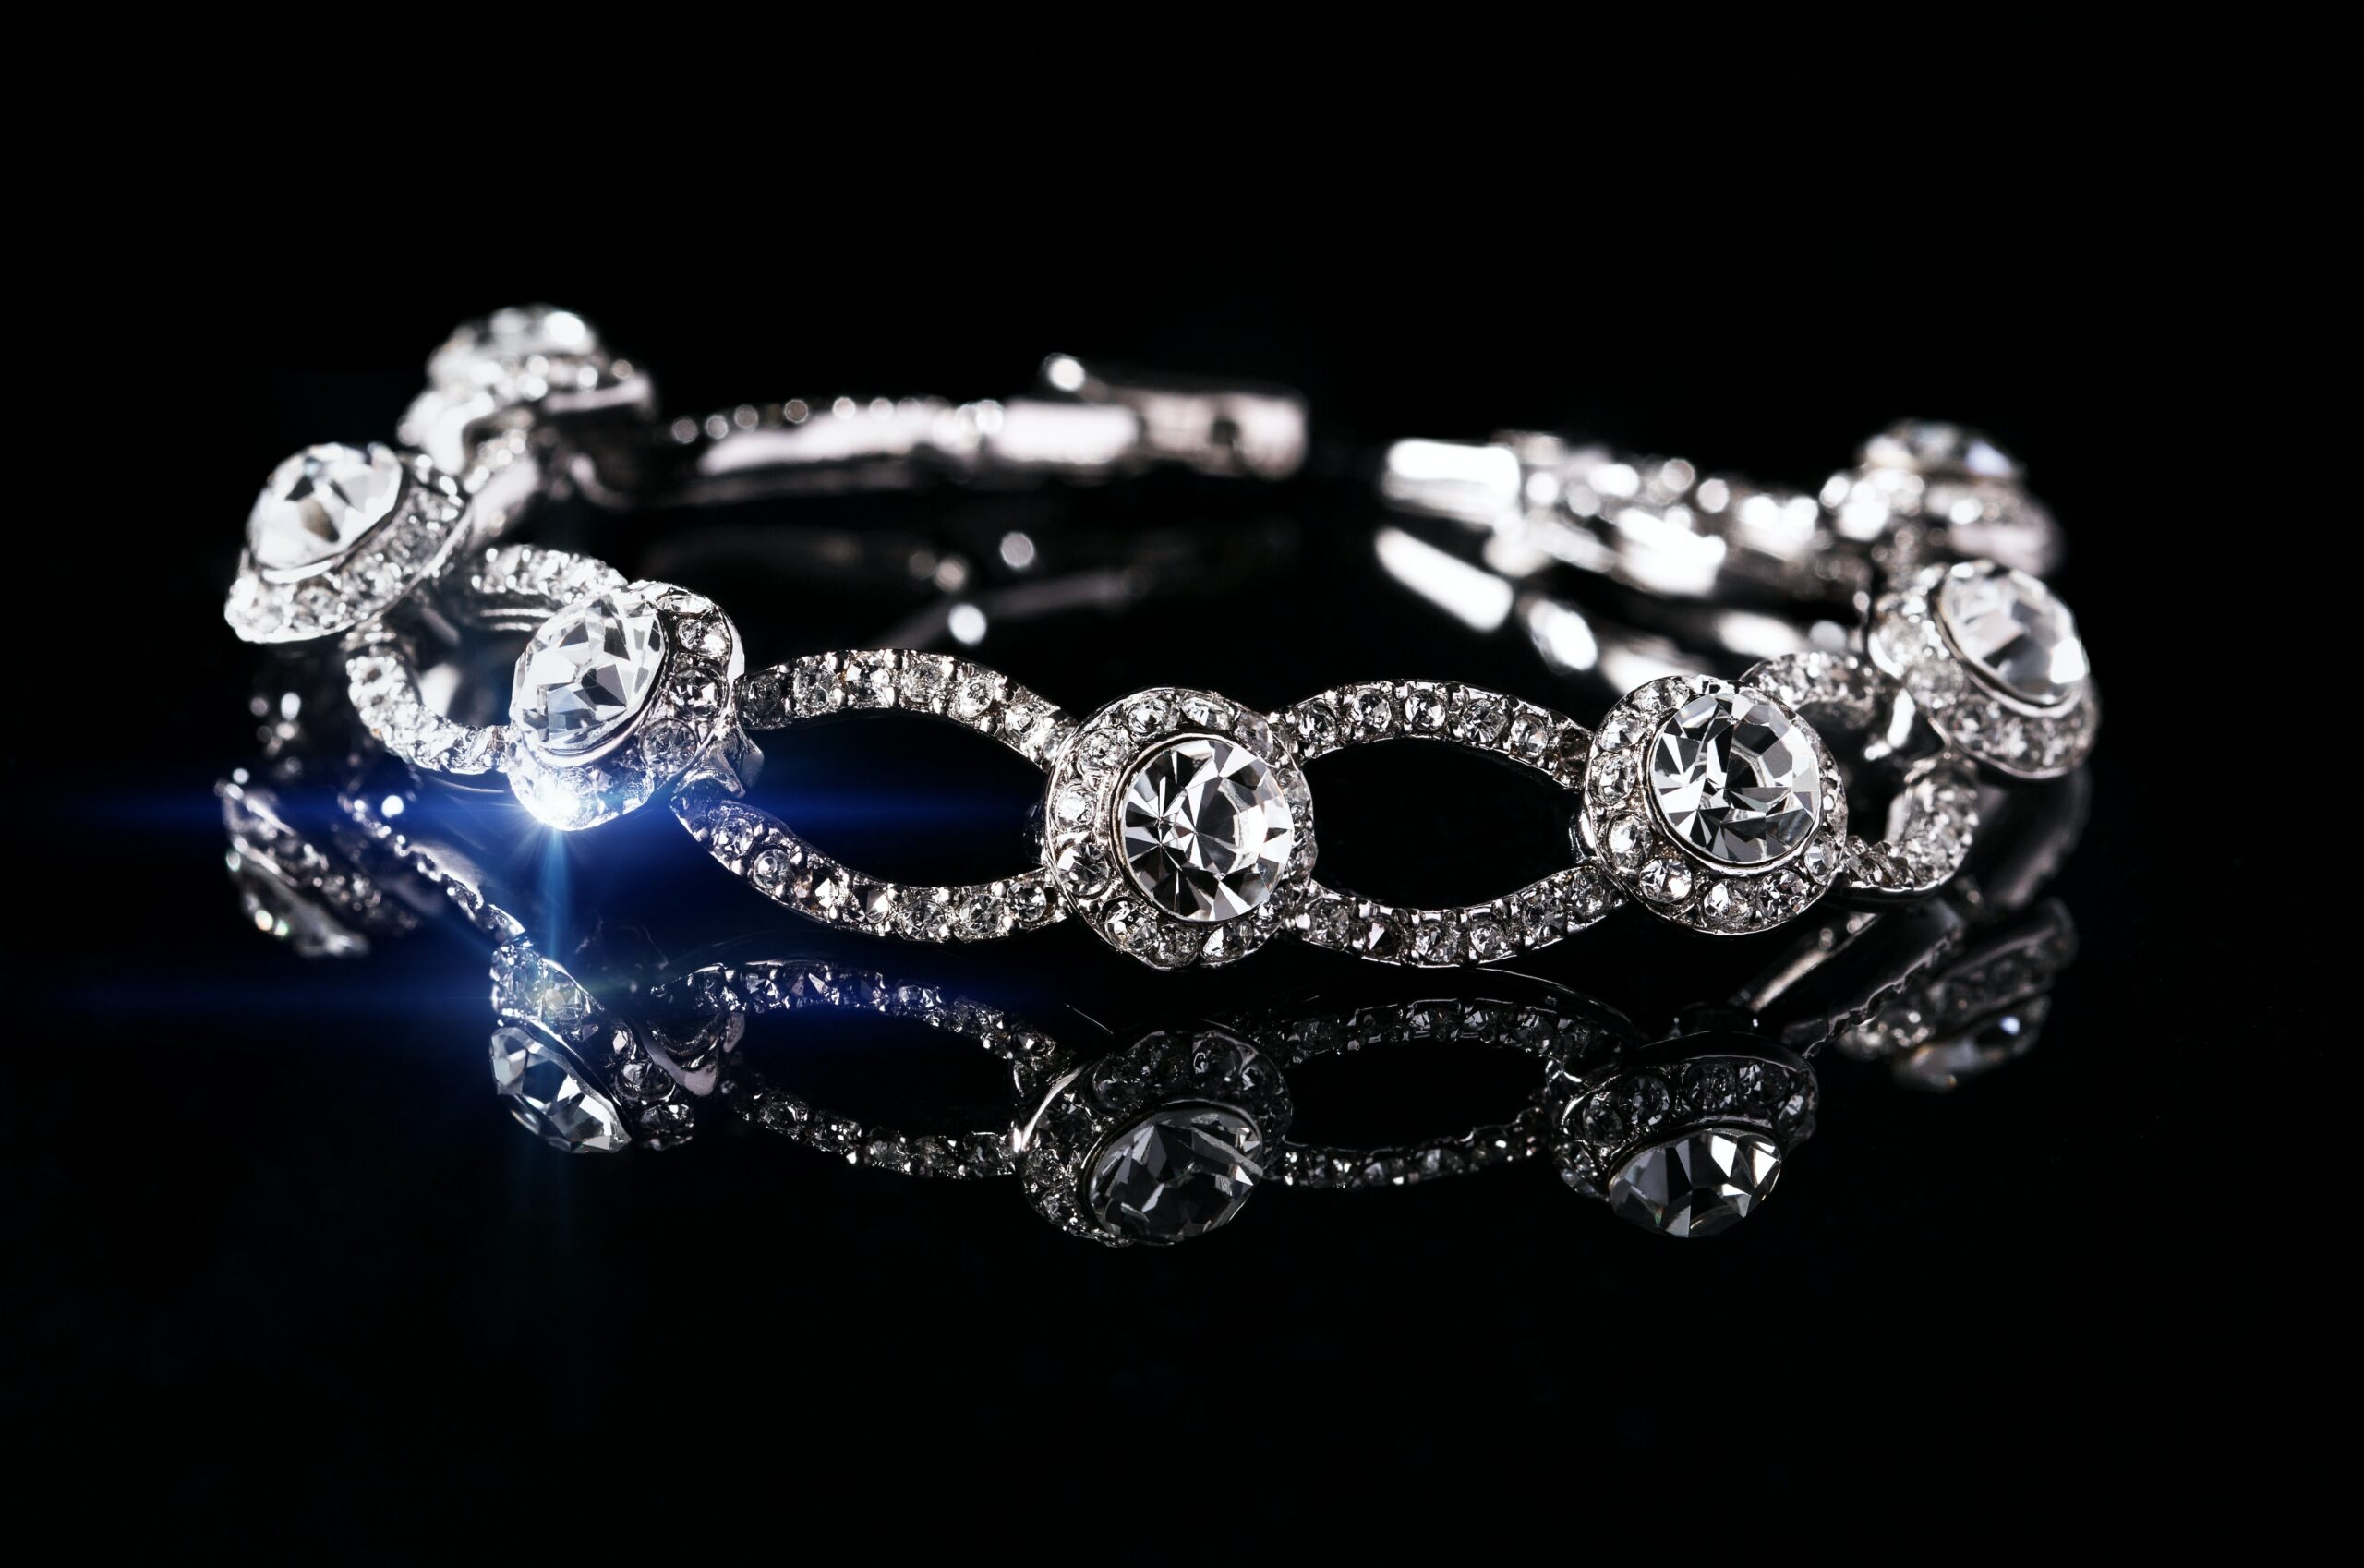 An elaborate silver and diamond ring on a reflective black surface.